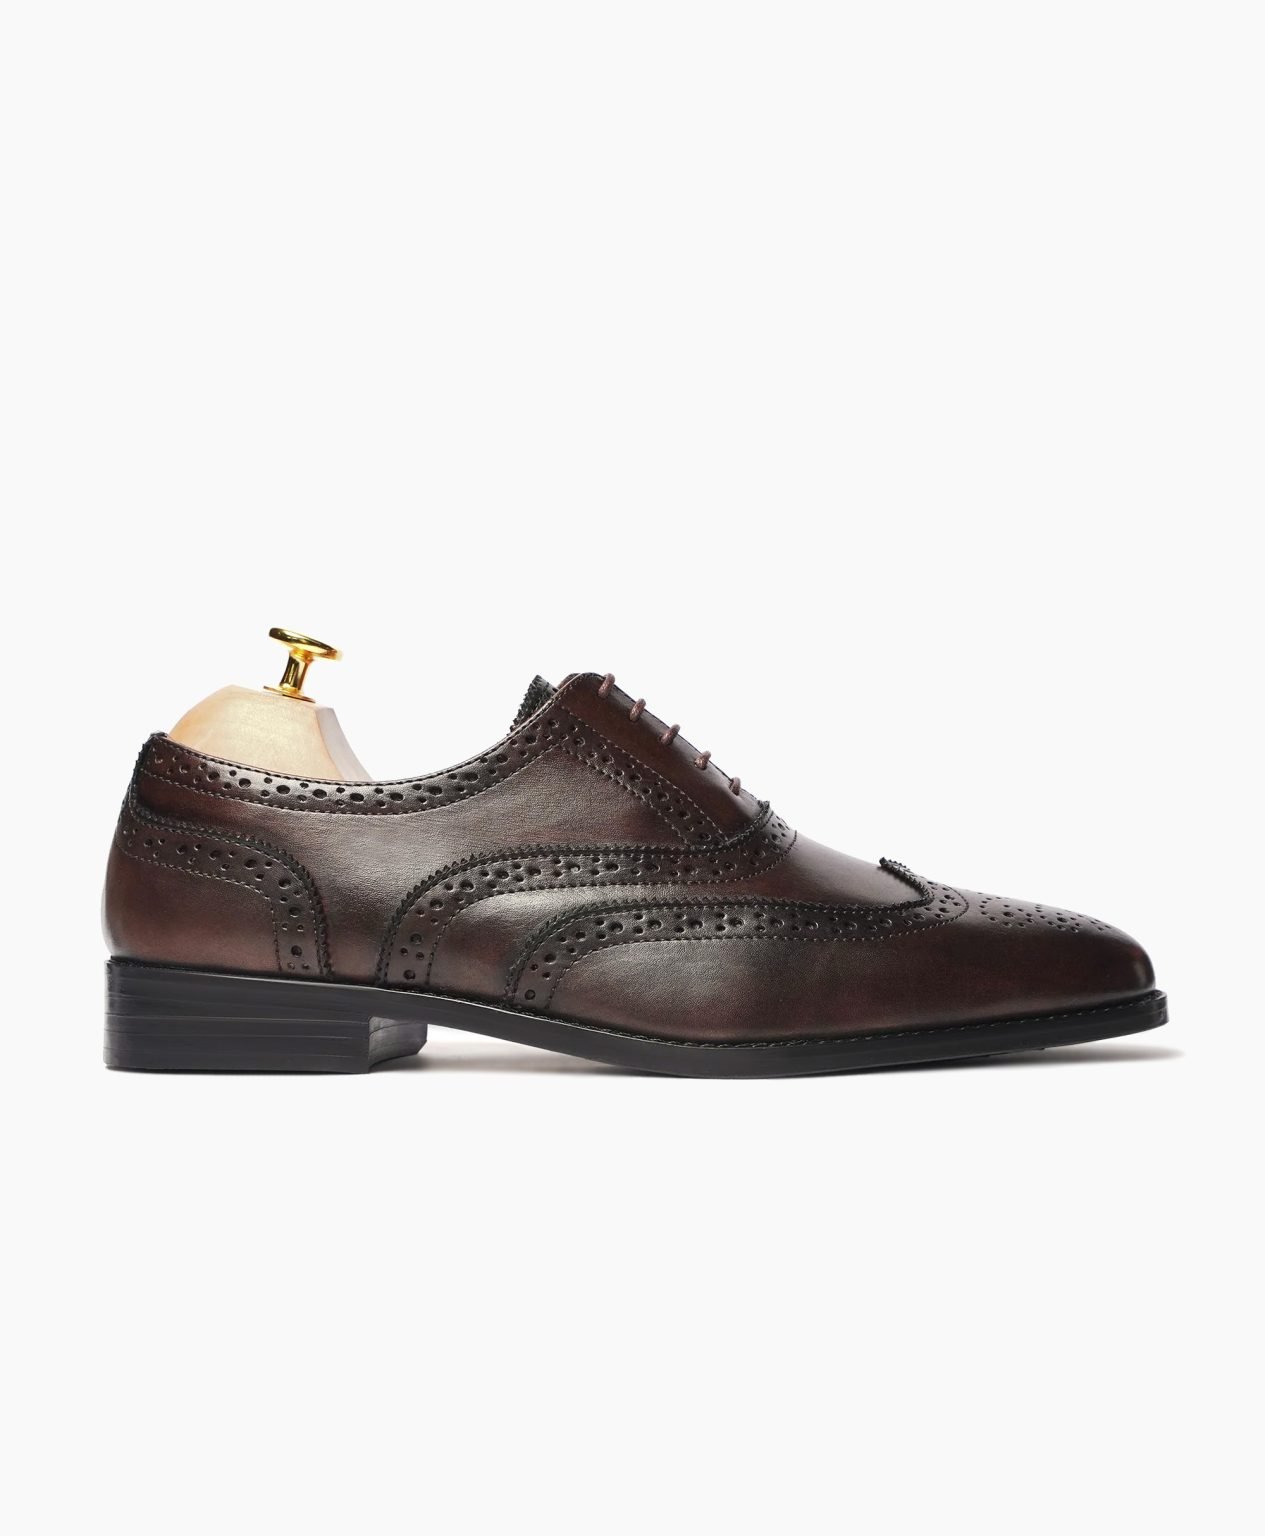 chiltern-oxford-dark-brown-leather-shoes-image201